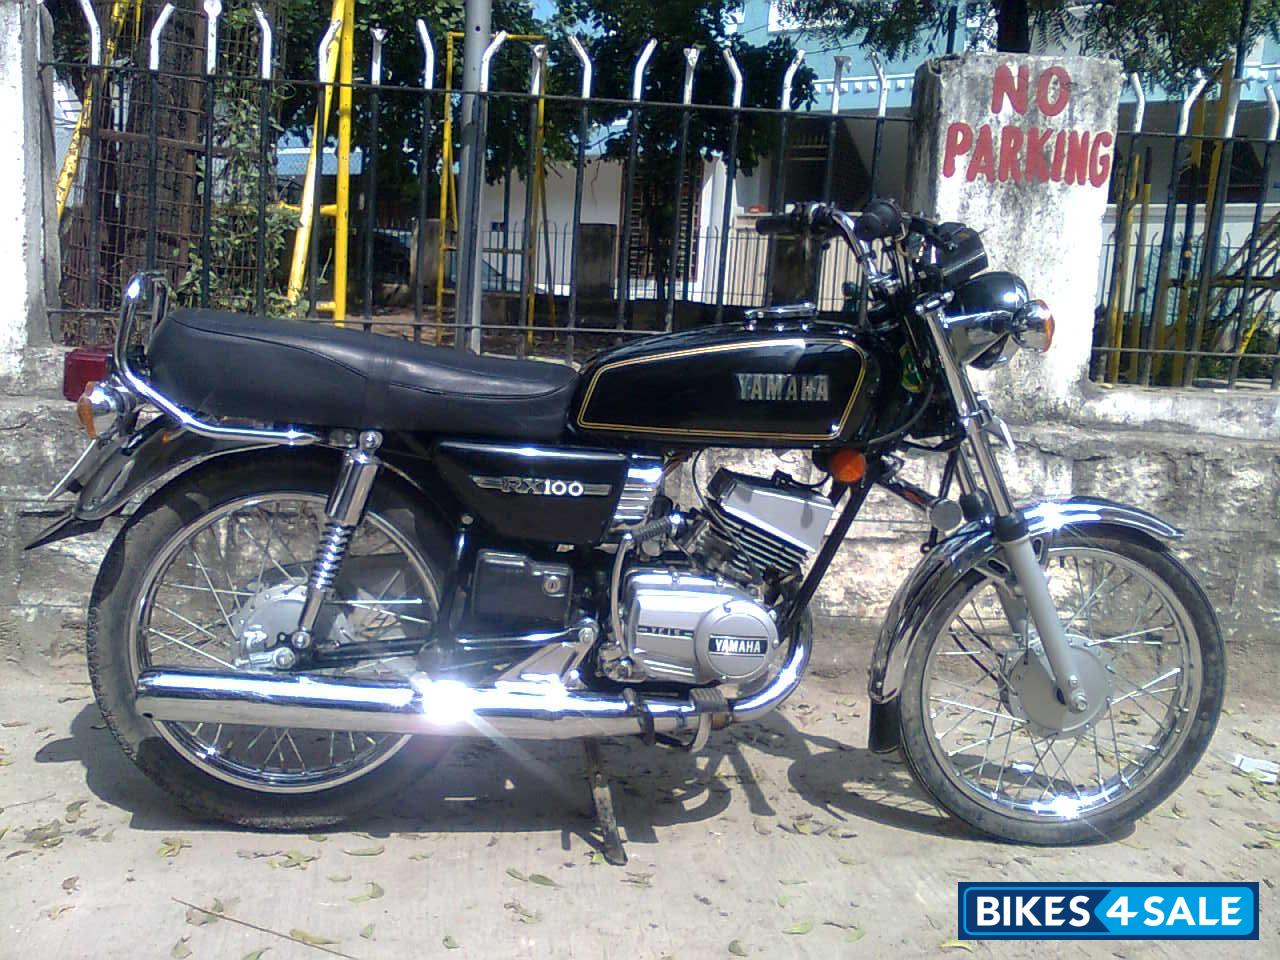 Used 1987 Model Yamaha Rx 100 For Sale In Hyderabad Id 375 Black Colour Bikes4sale